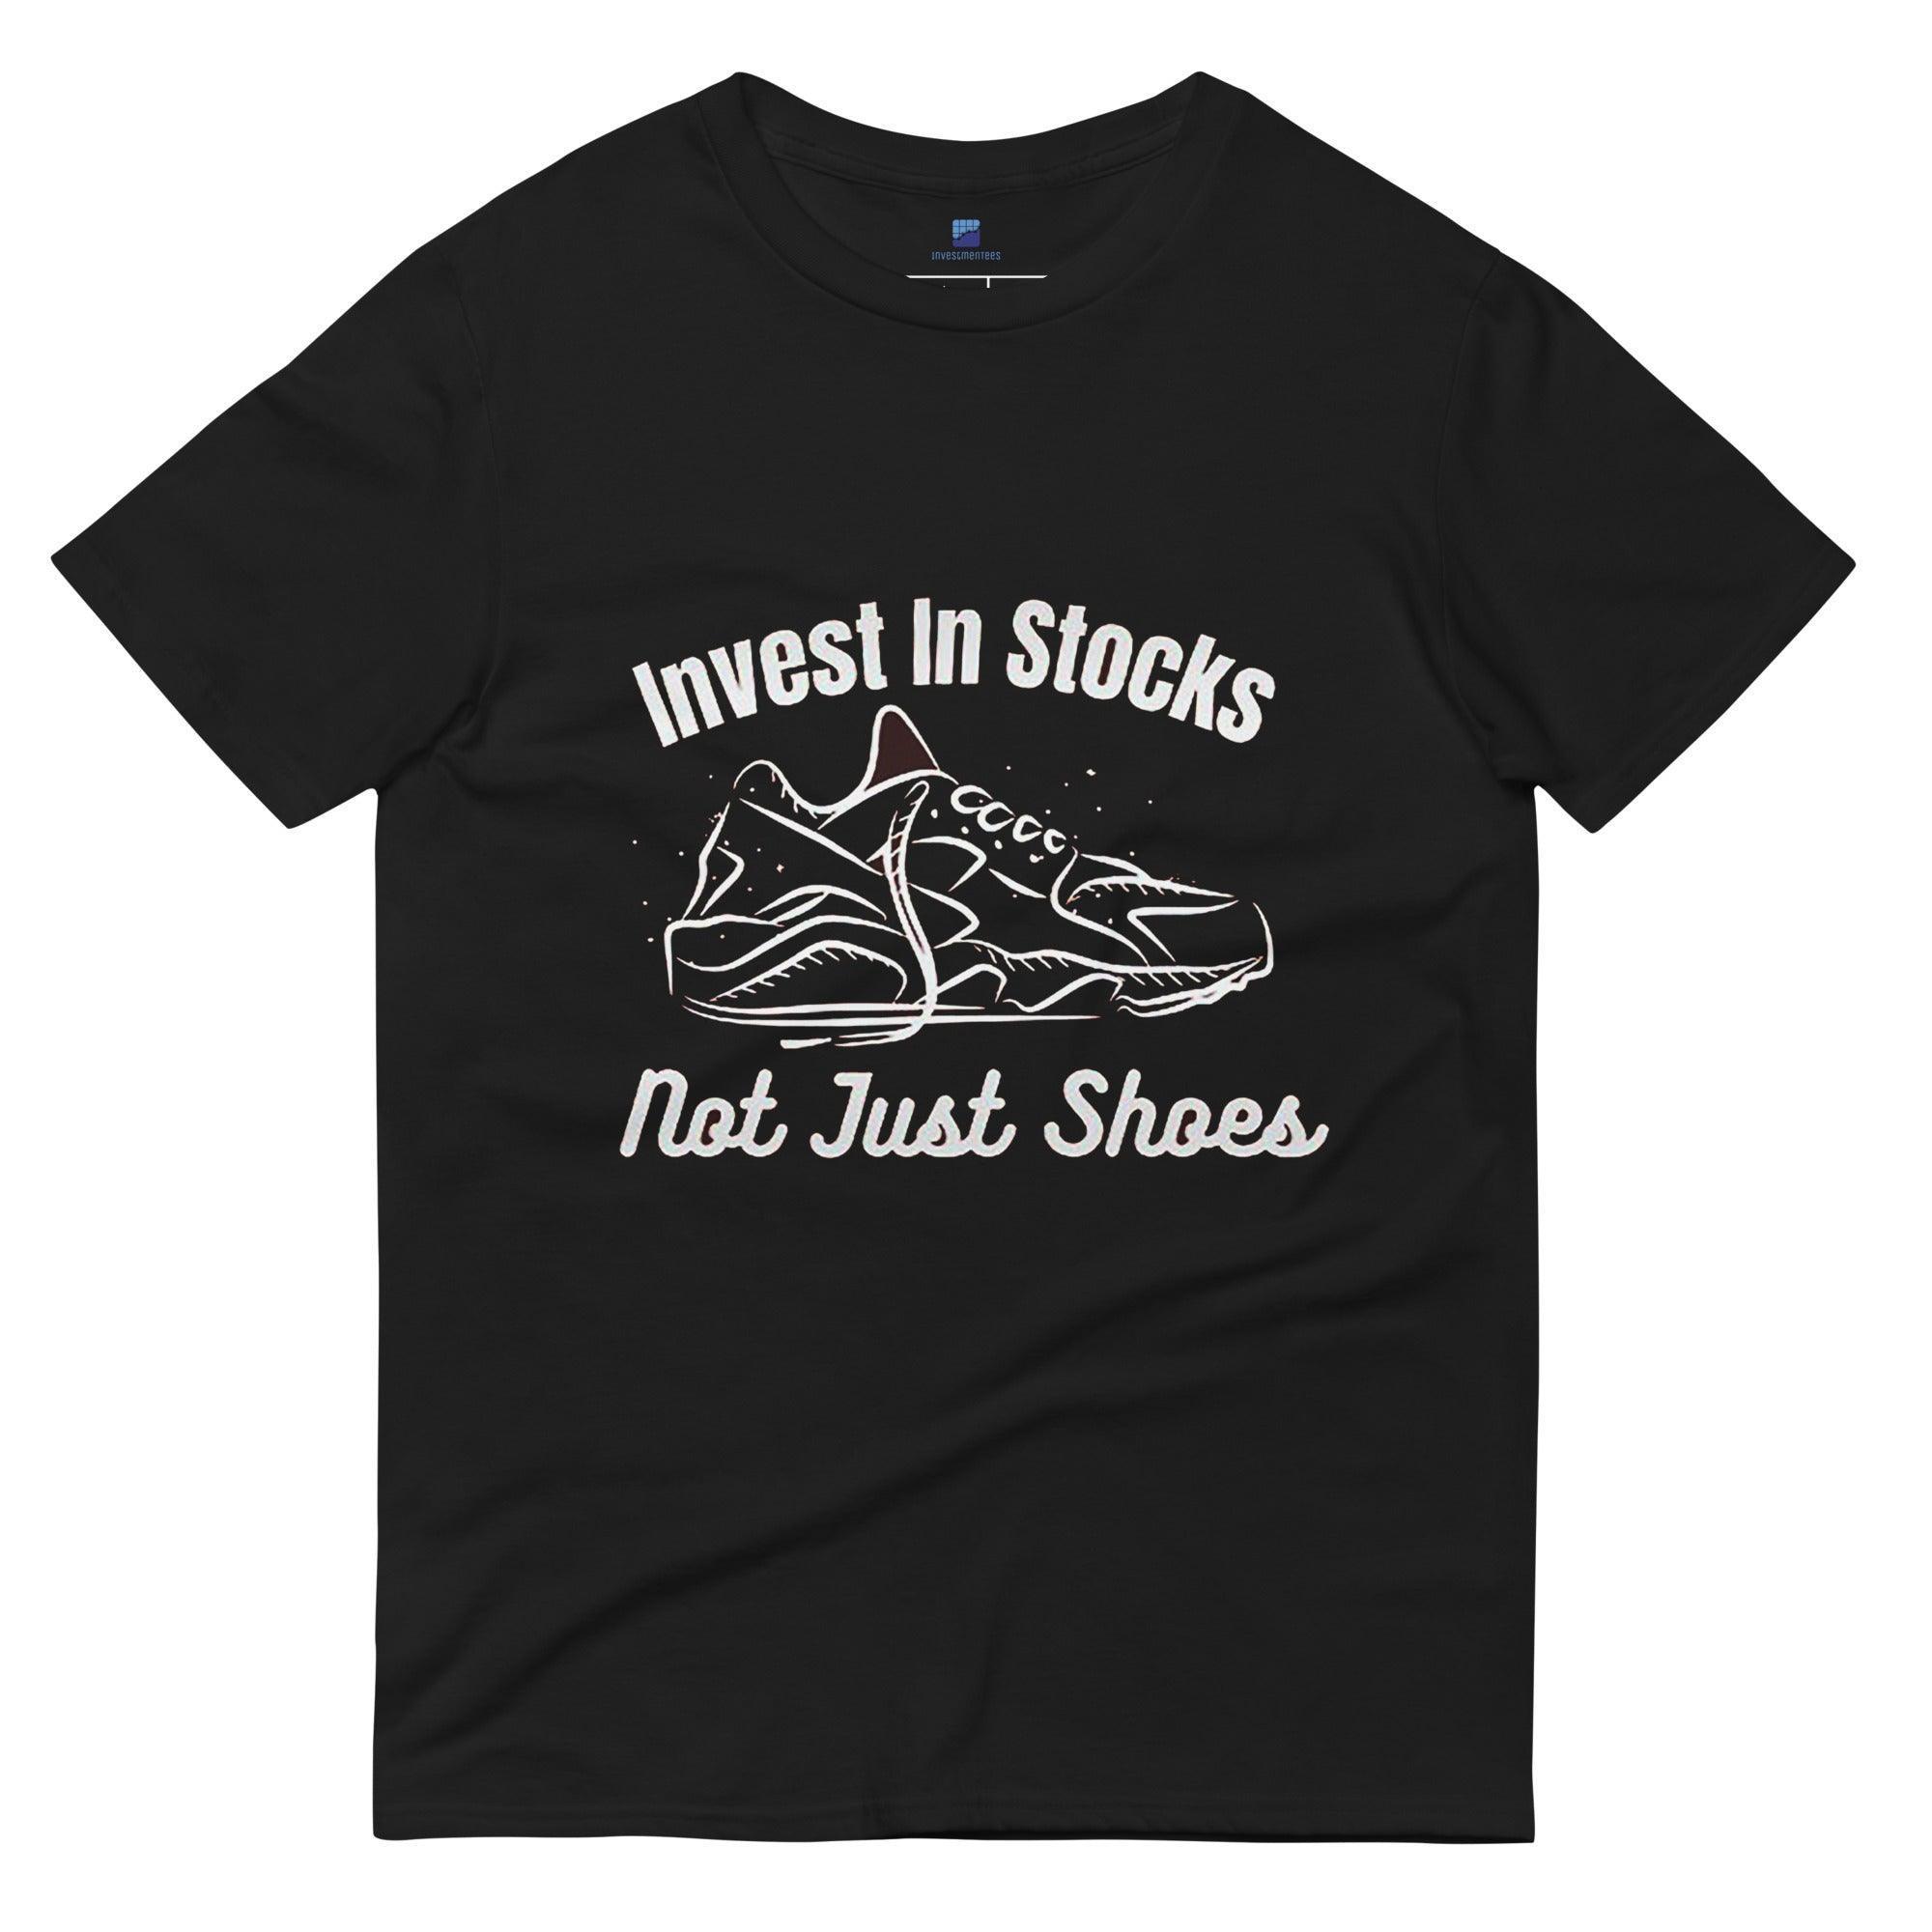 Invest In Stocks Not Just Shoes T-Shirt - InvestmenTees